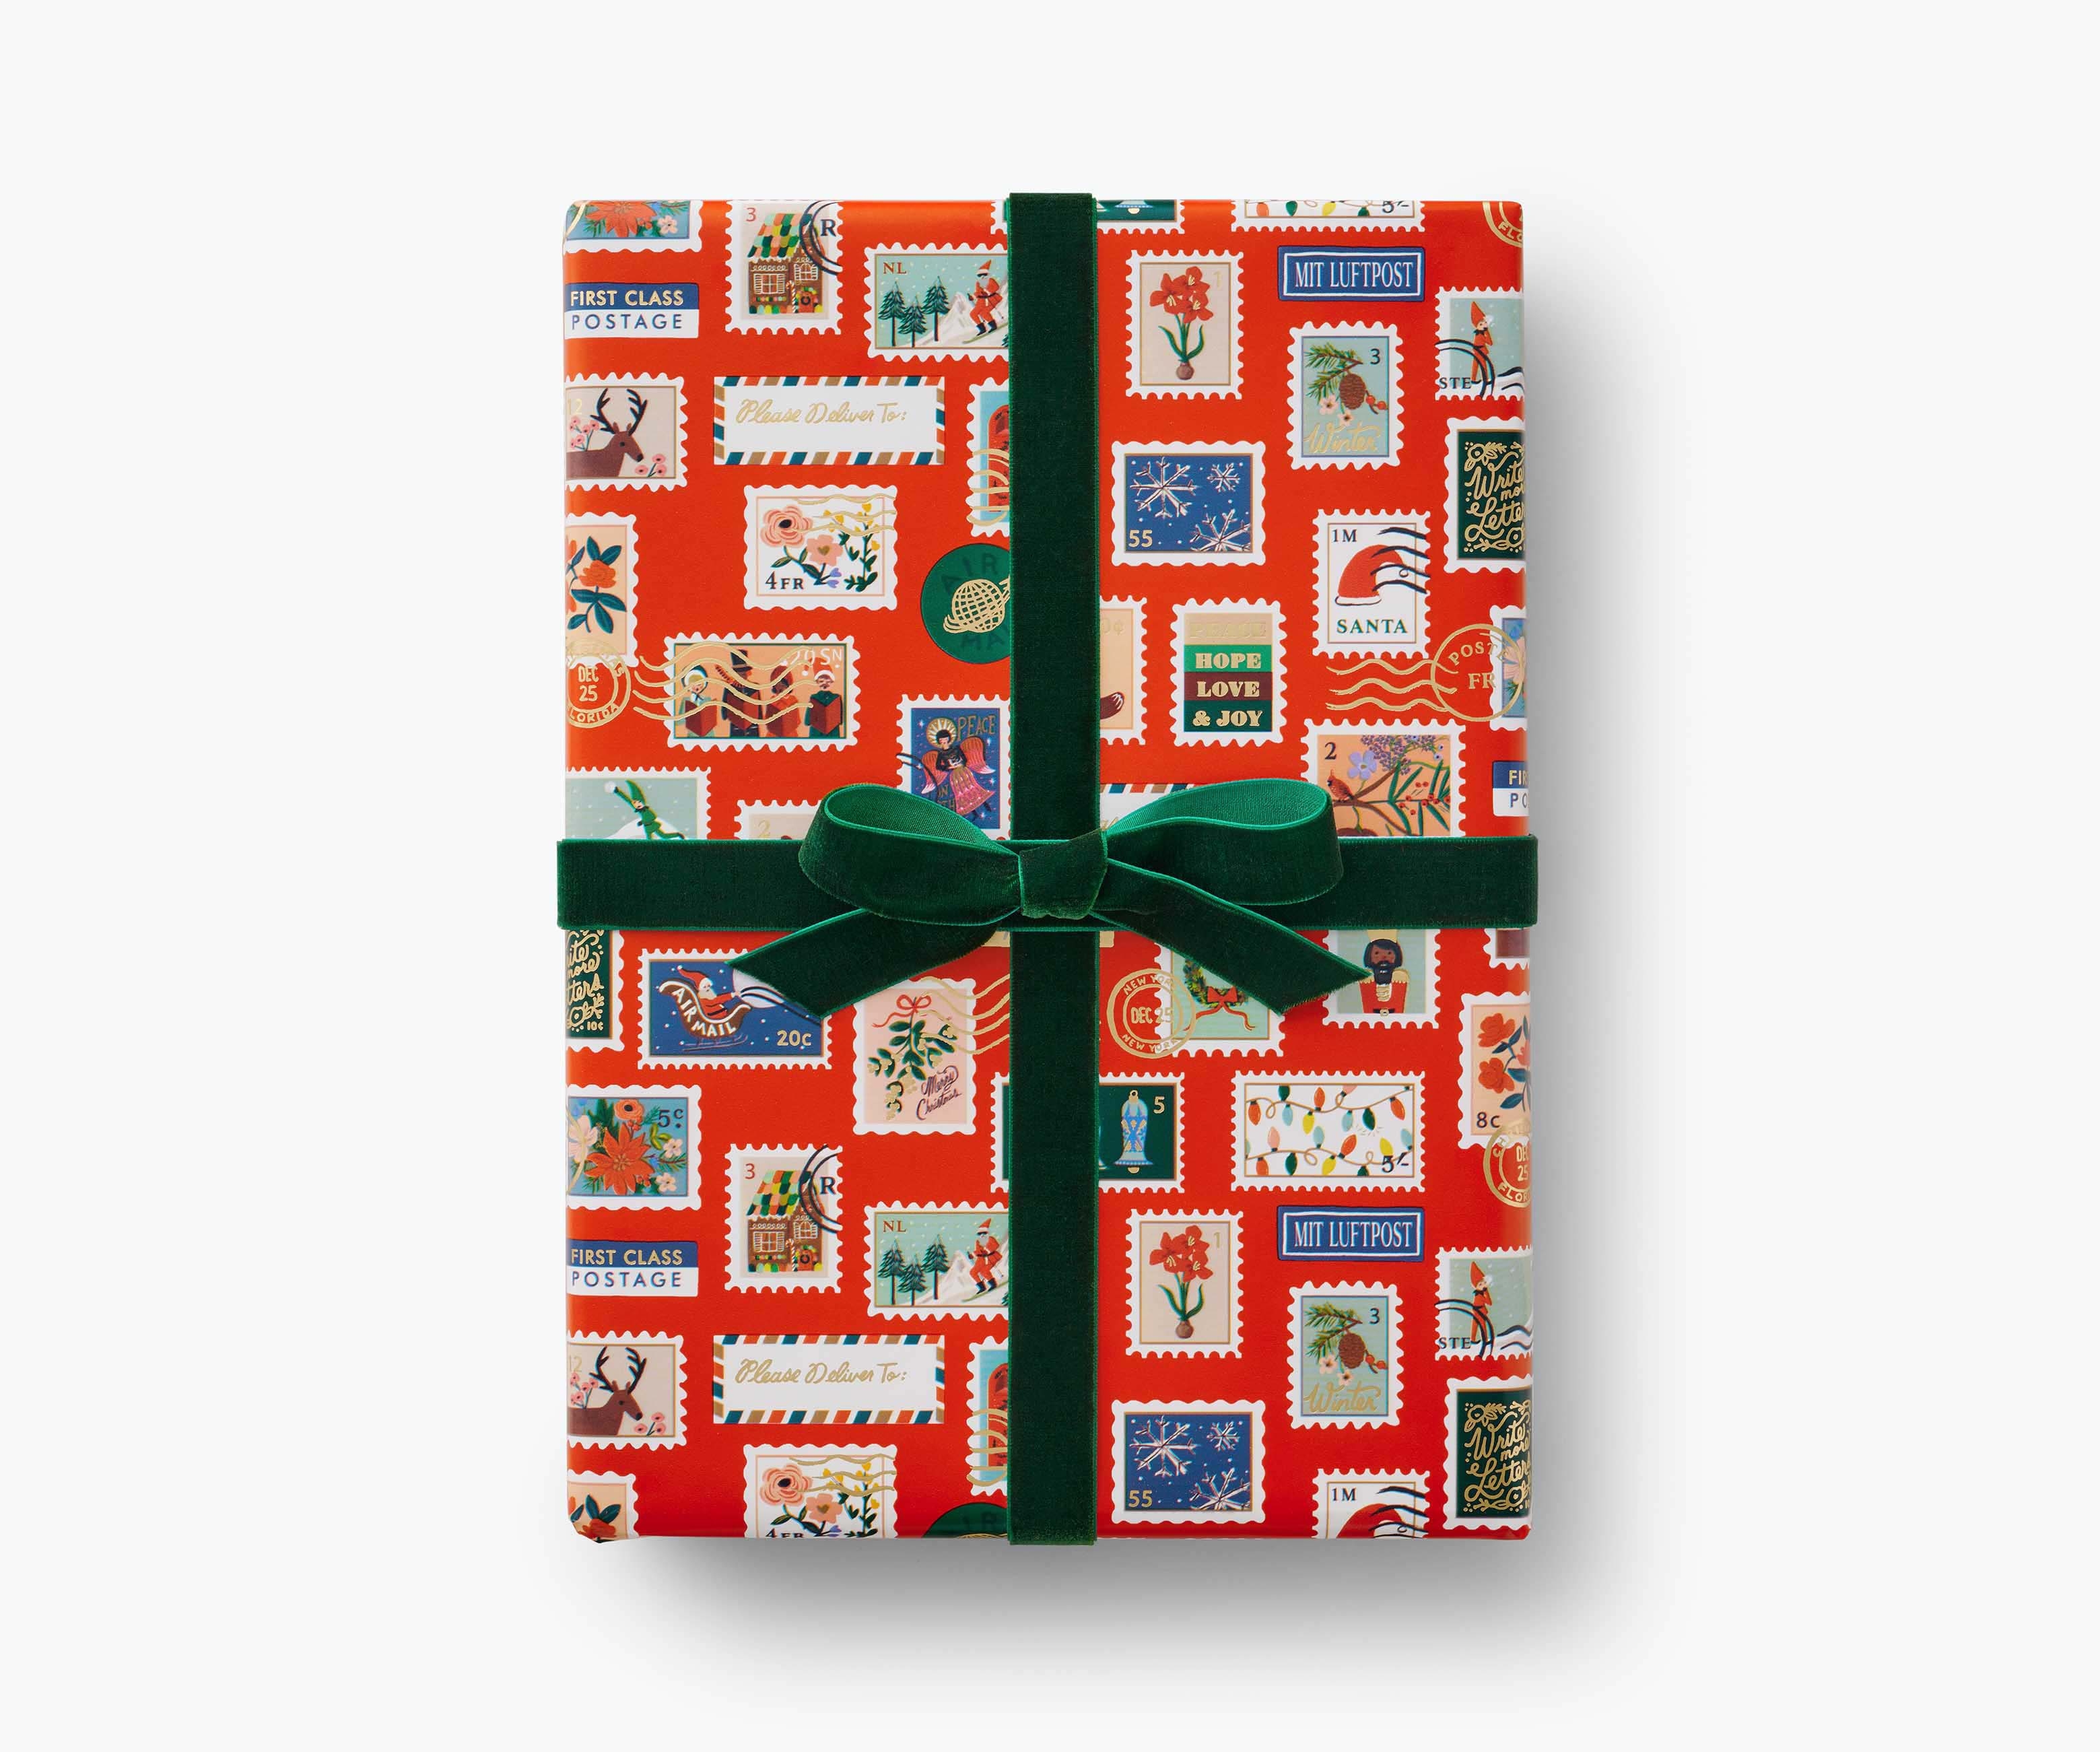 Rifle Paper Co. Wildflower Continuous Wrapping Roll